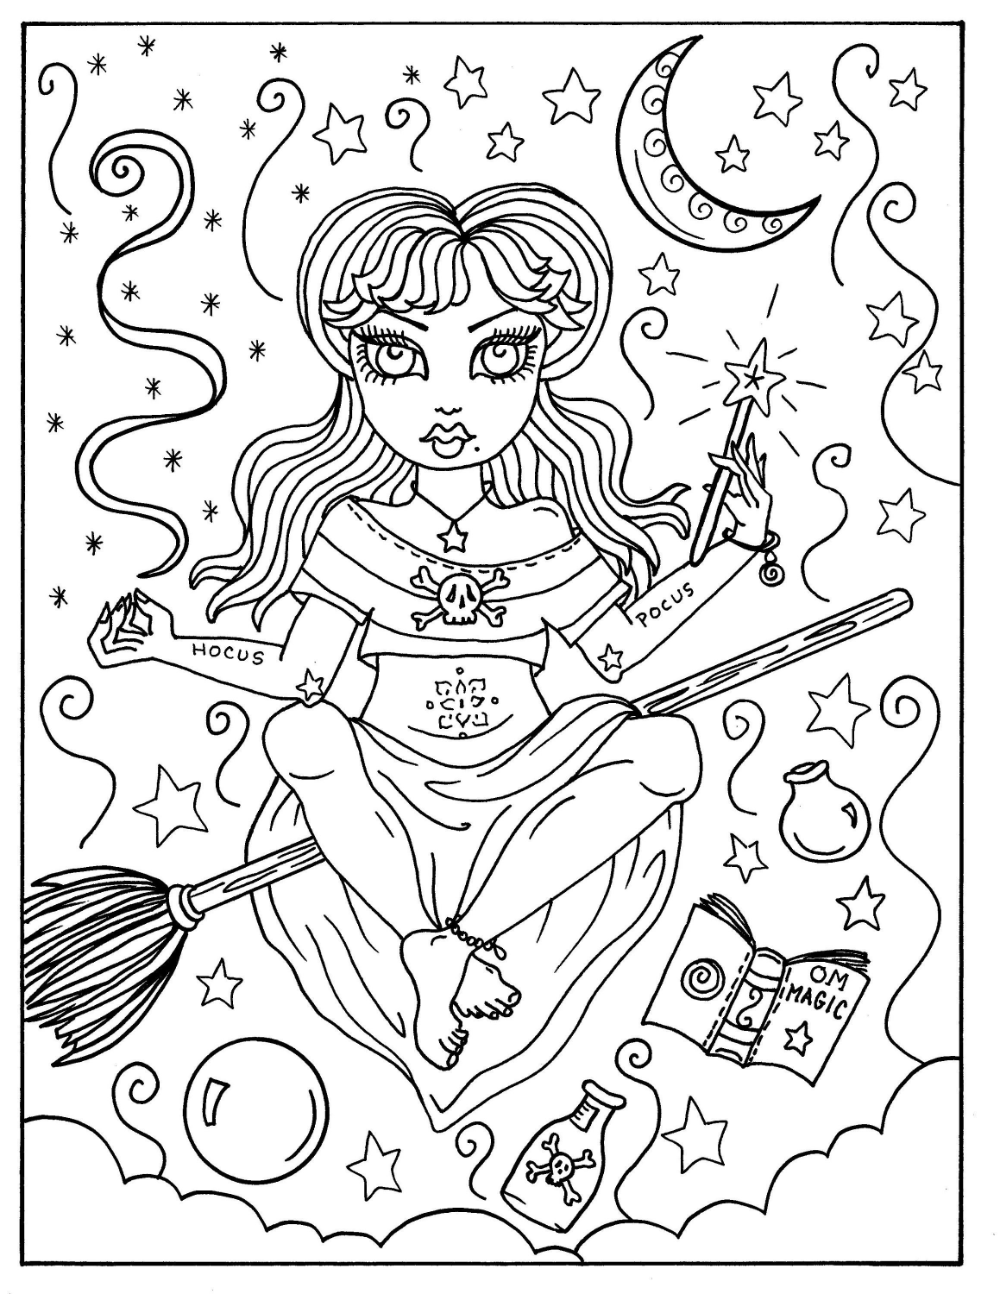 Hocus Pocus Witches printable Coloring pages for adults, halloween fun,  halloween witch, whimsical coloring book, Halloween coloring book in 2020 |  Witch coloring pages, Barbie coloring pages, Halloween coloring